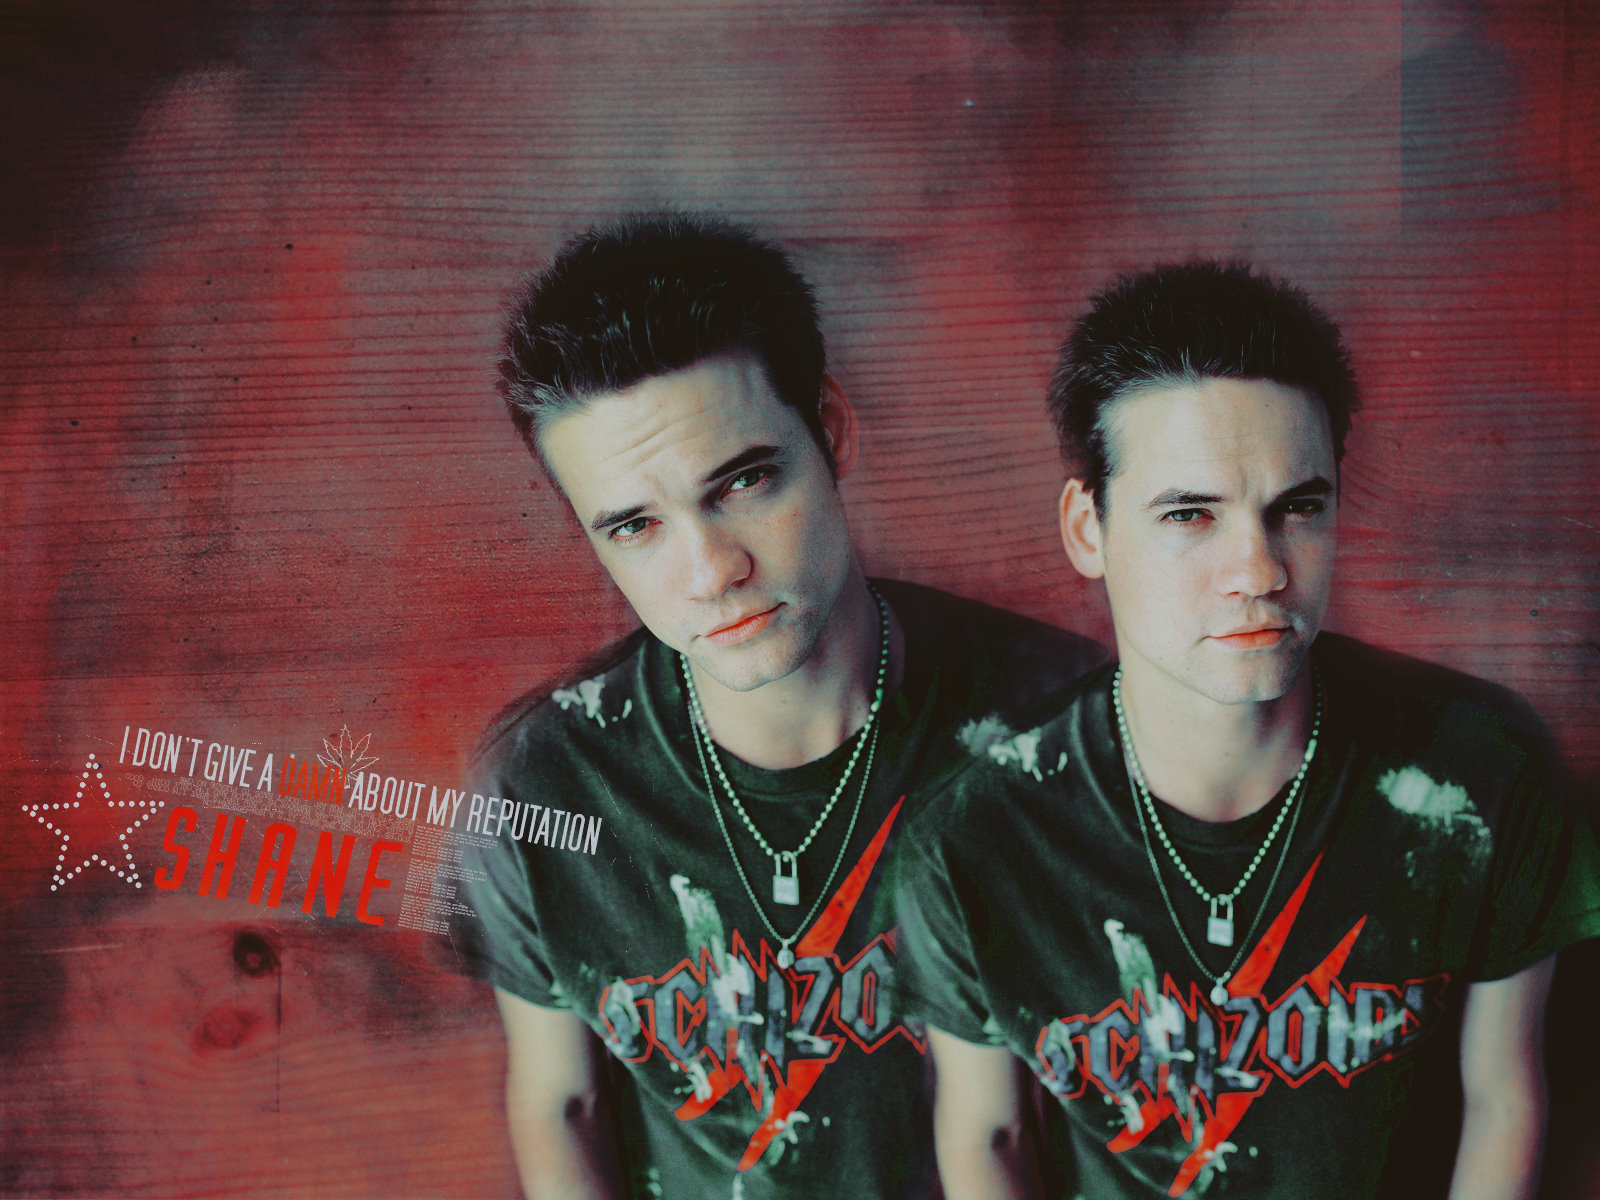 shane west wallpaper ii by ~haunted-passion on deviantart